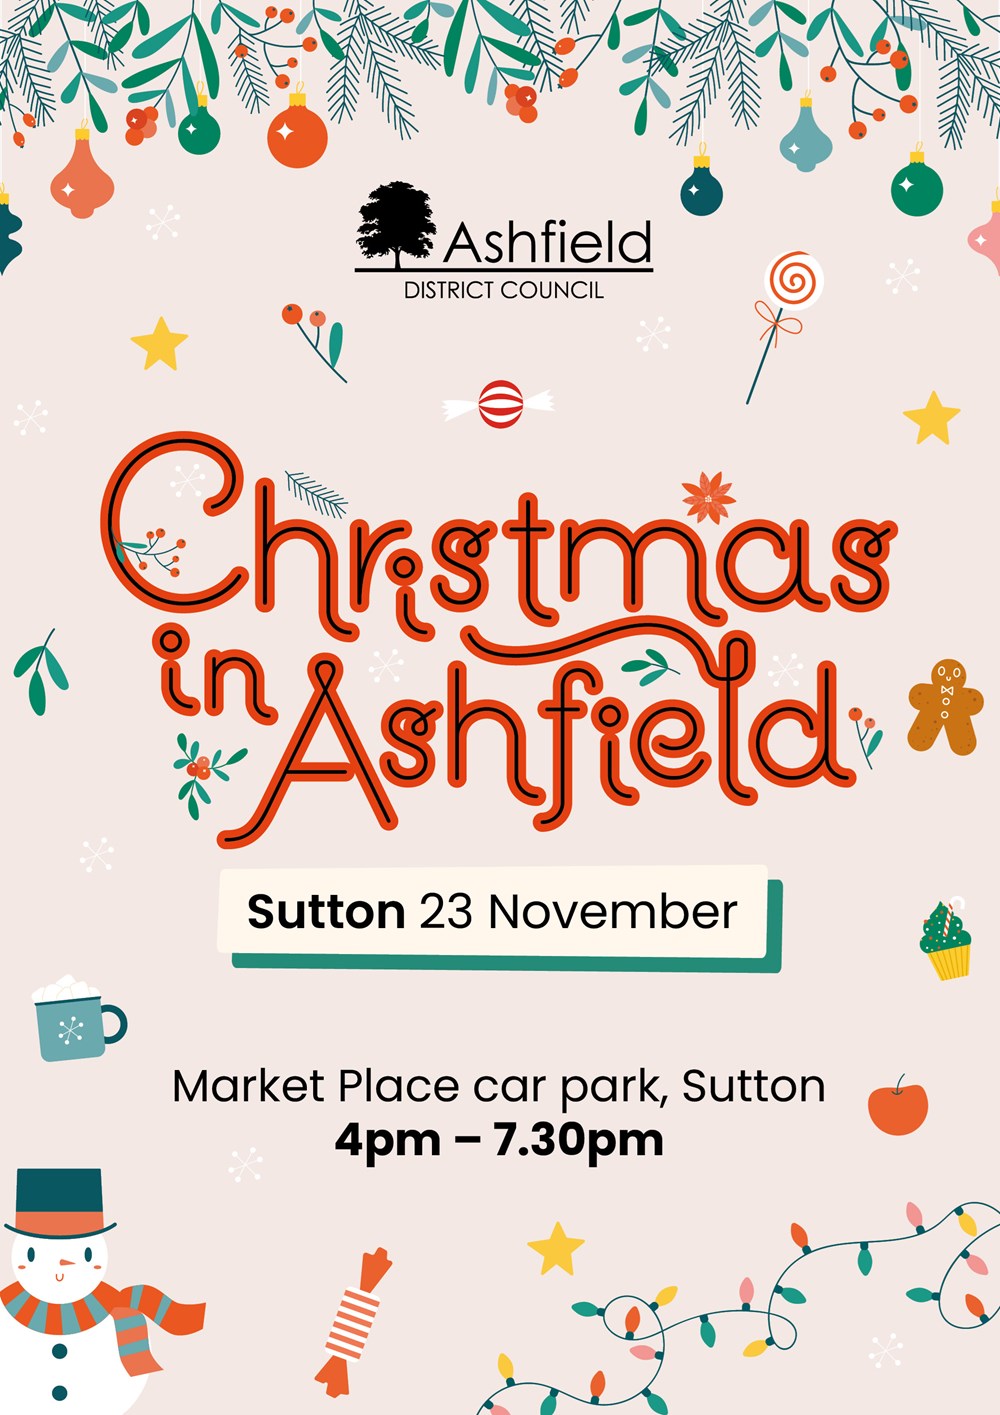 Christmas in Ashfield Sutton 23 November on Market Place car park from 4pm - 7.30pm